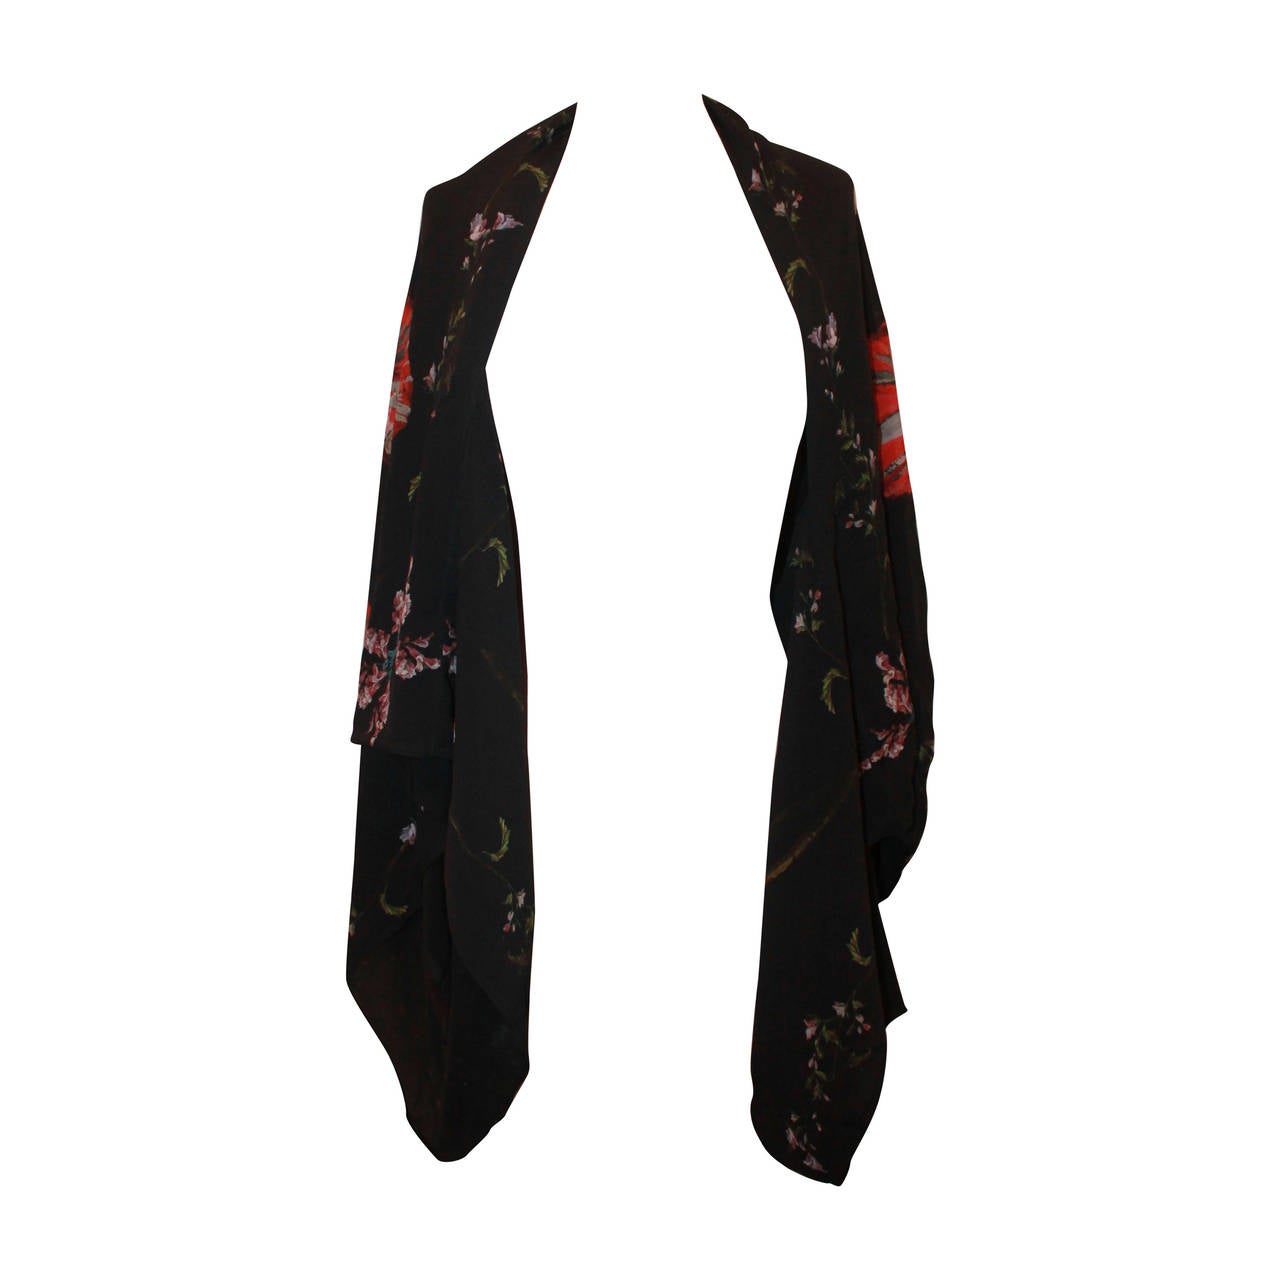 Alexander McQueen Black Silk Chiffon Floral Printed Kimono - 10. This kimono is in excellent condition with very light wear. It is a size 10 but looks good on smaller sizes as well due to its versatile oversized style. The garment has one slit at